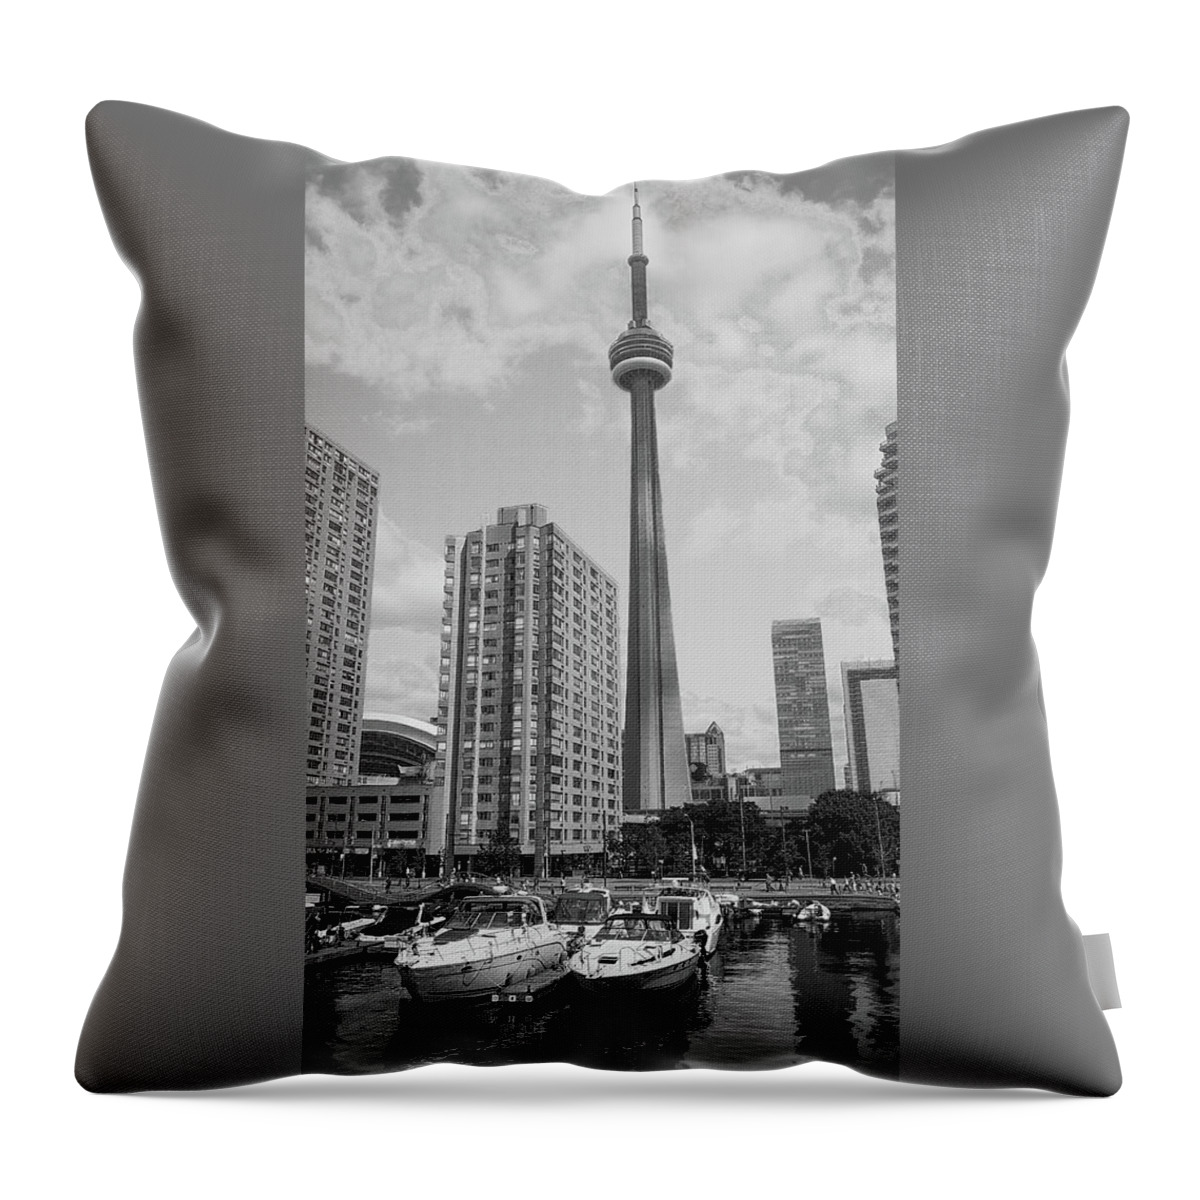 Boats Throw Pillow featuring the photograph CN Tower Toronto by James Canning